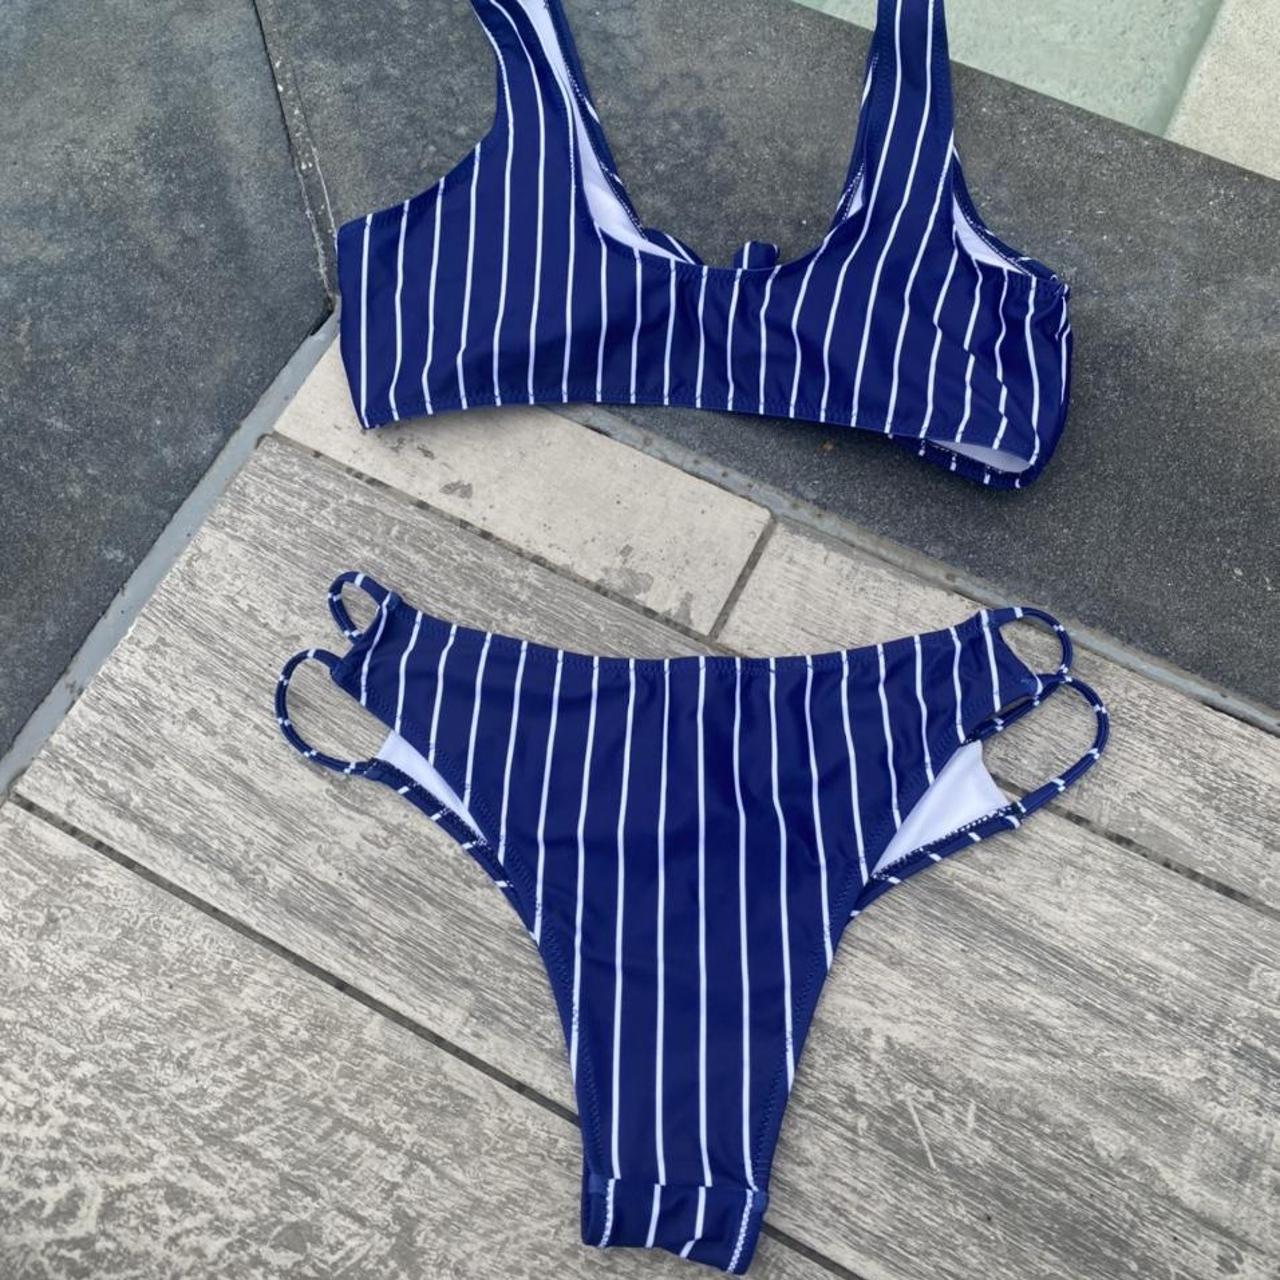 Blooming & Co. Women's Blue and White Bikinis-and-tankini-sets (3)